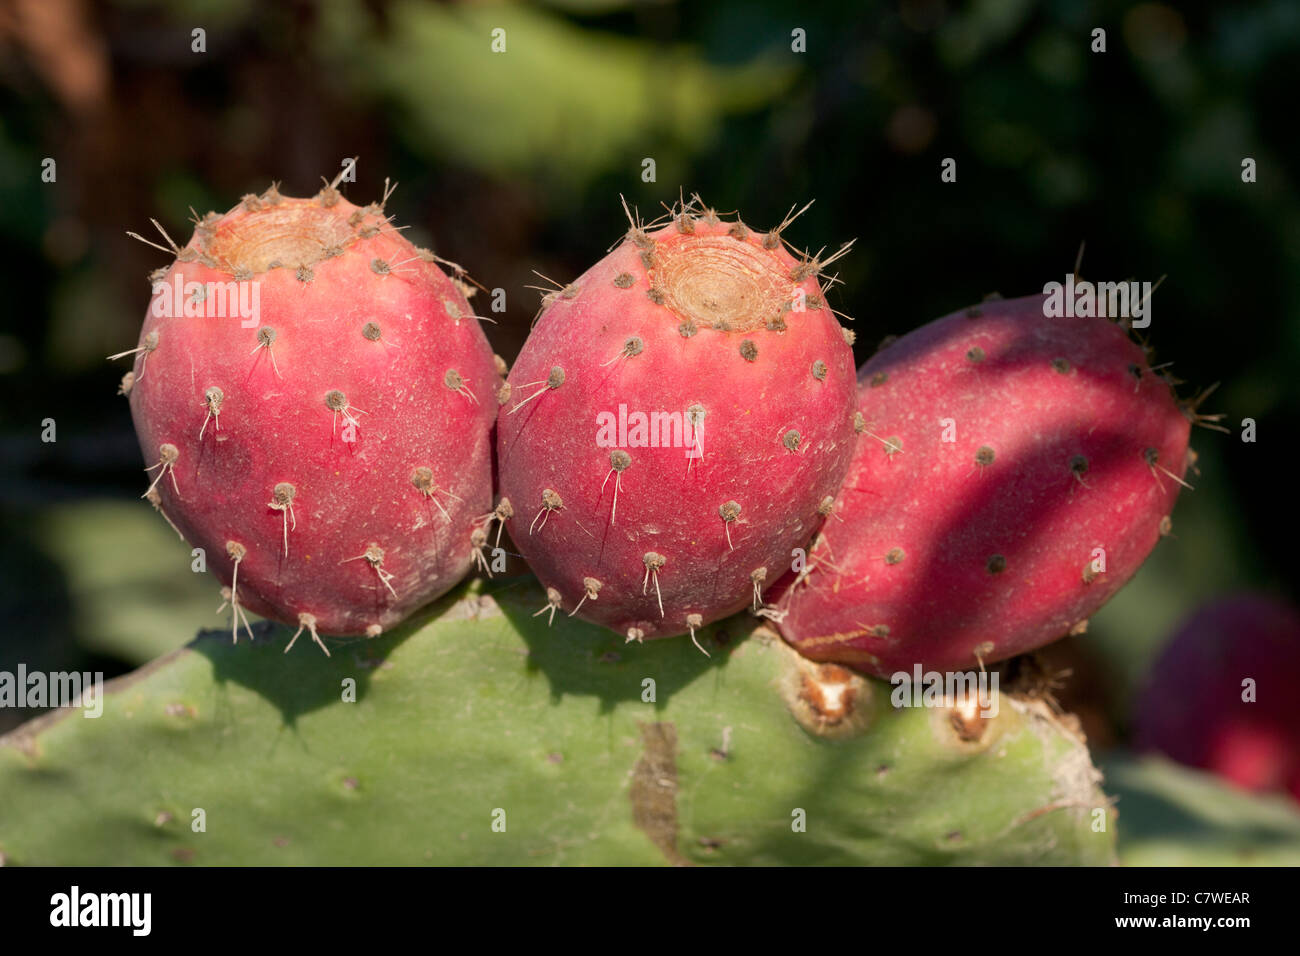 Red ripe prickly pear fruit of the Cactus Stock Photo